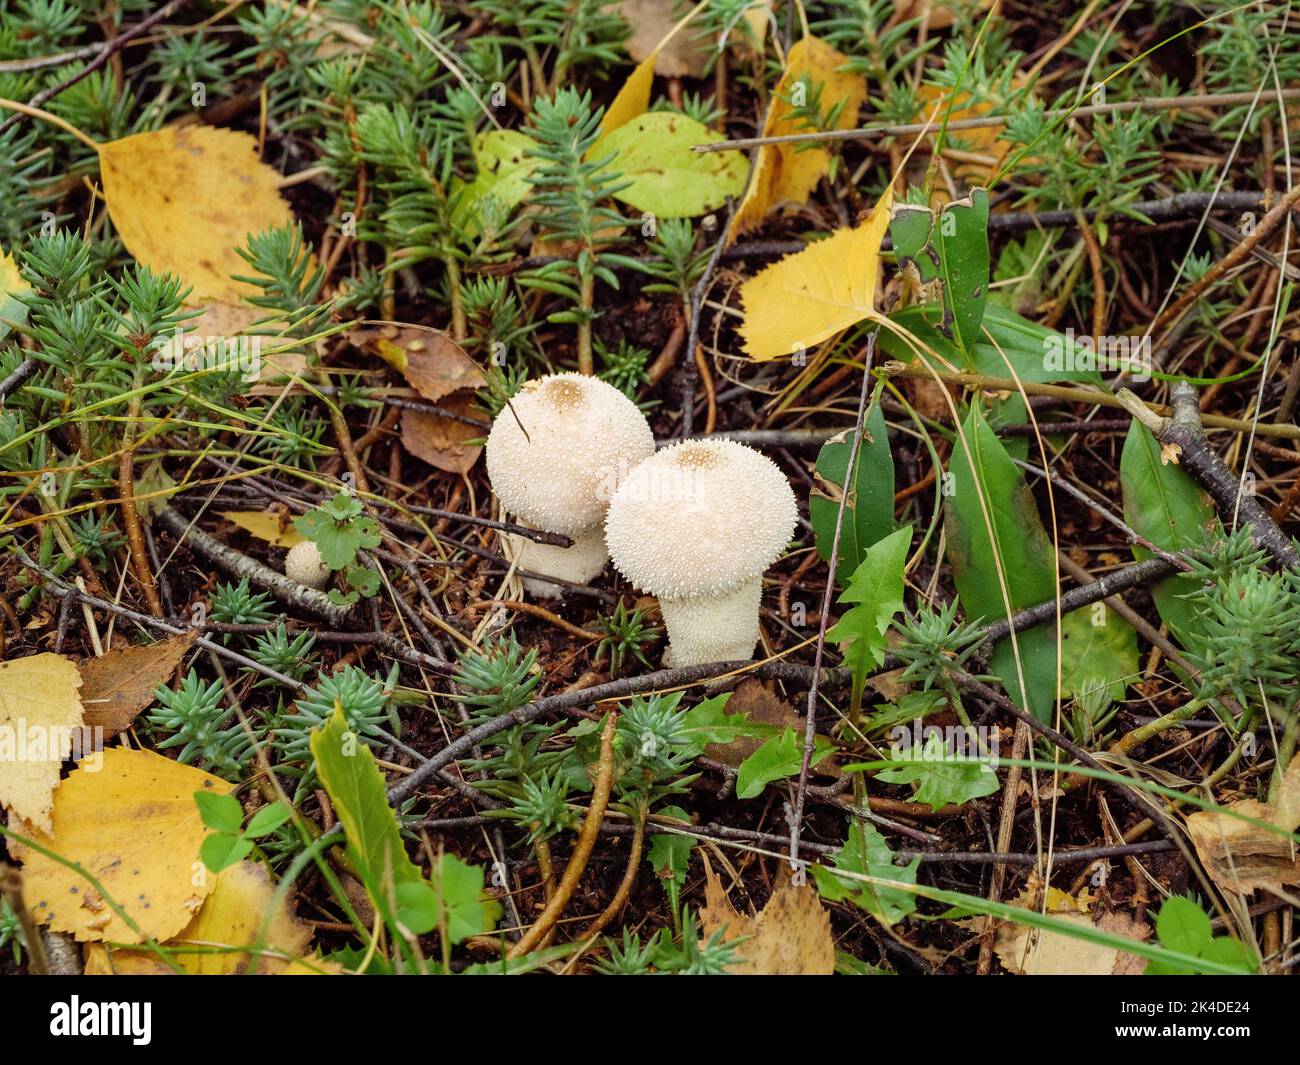 2 white rainforest or raincoat mushrooms in the grass among the leaves Stock Photo